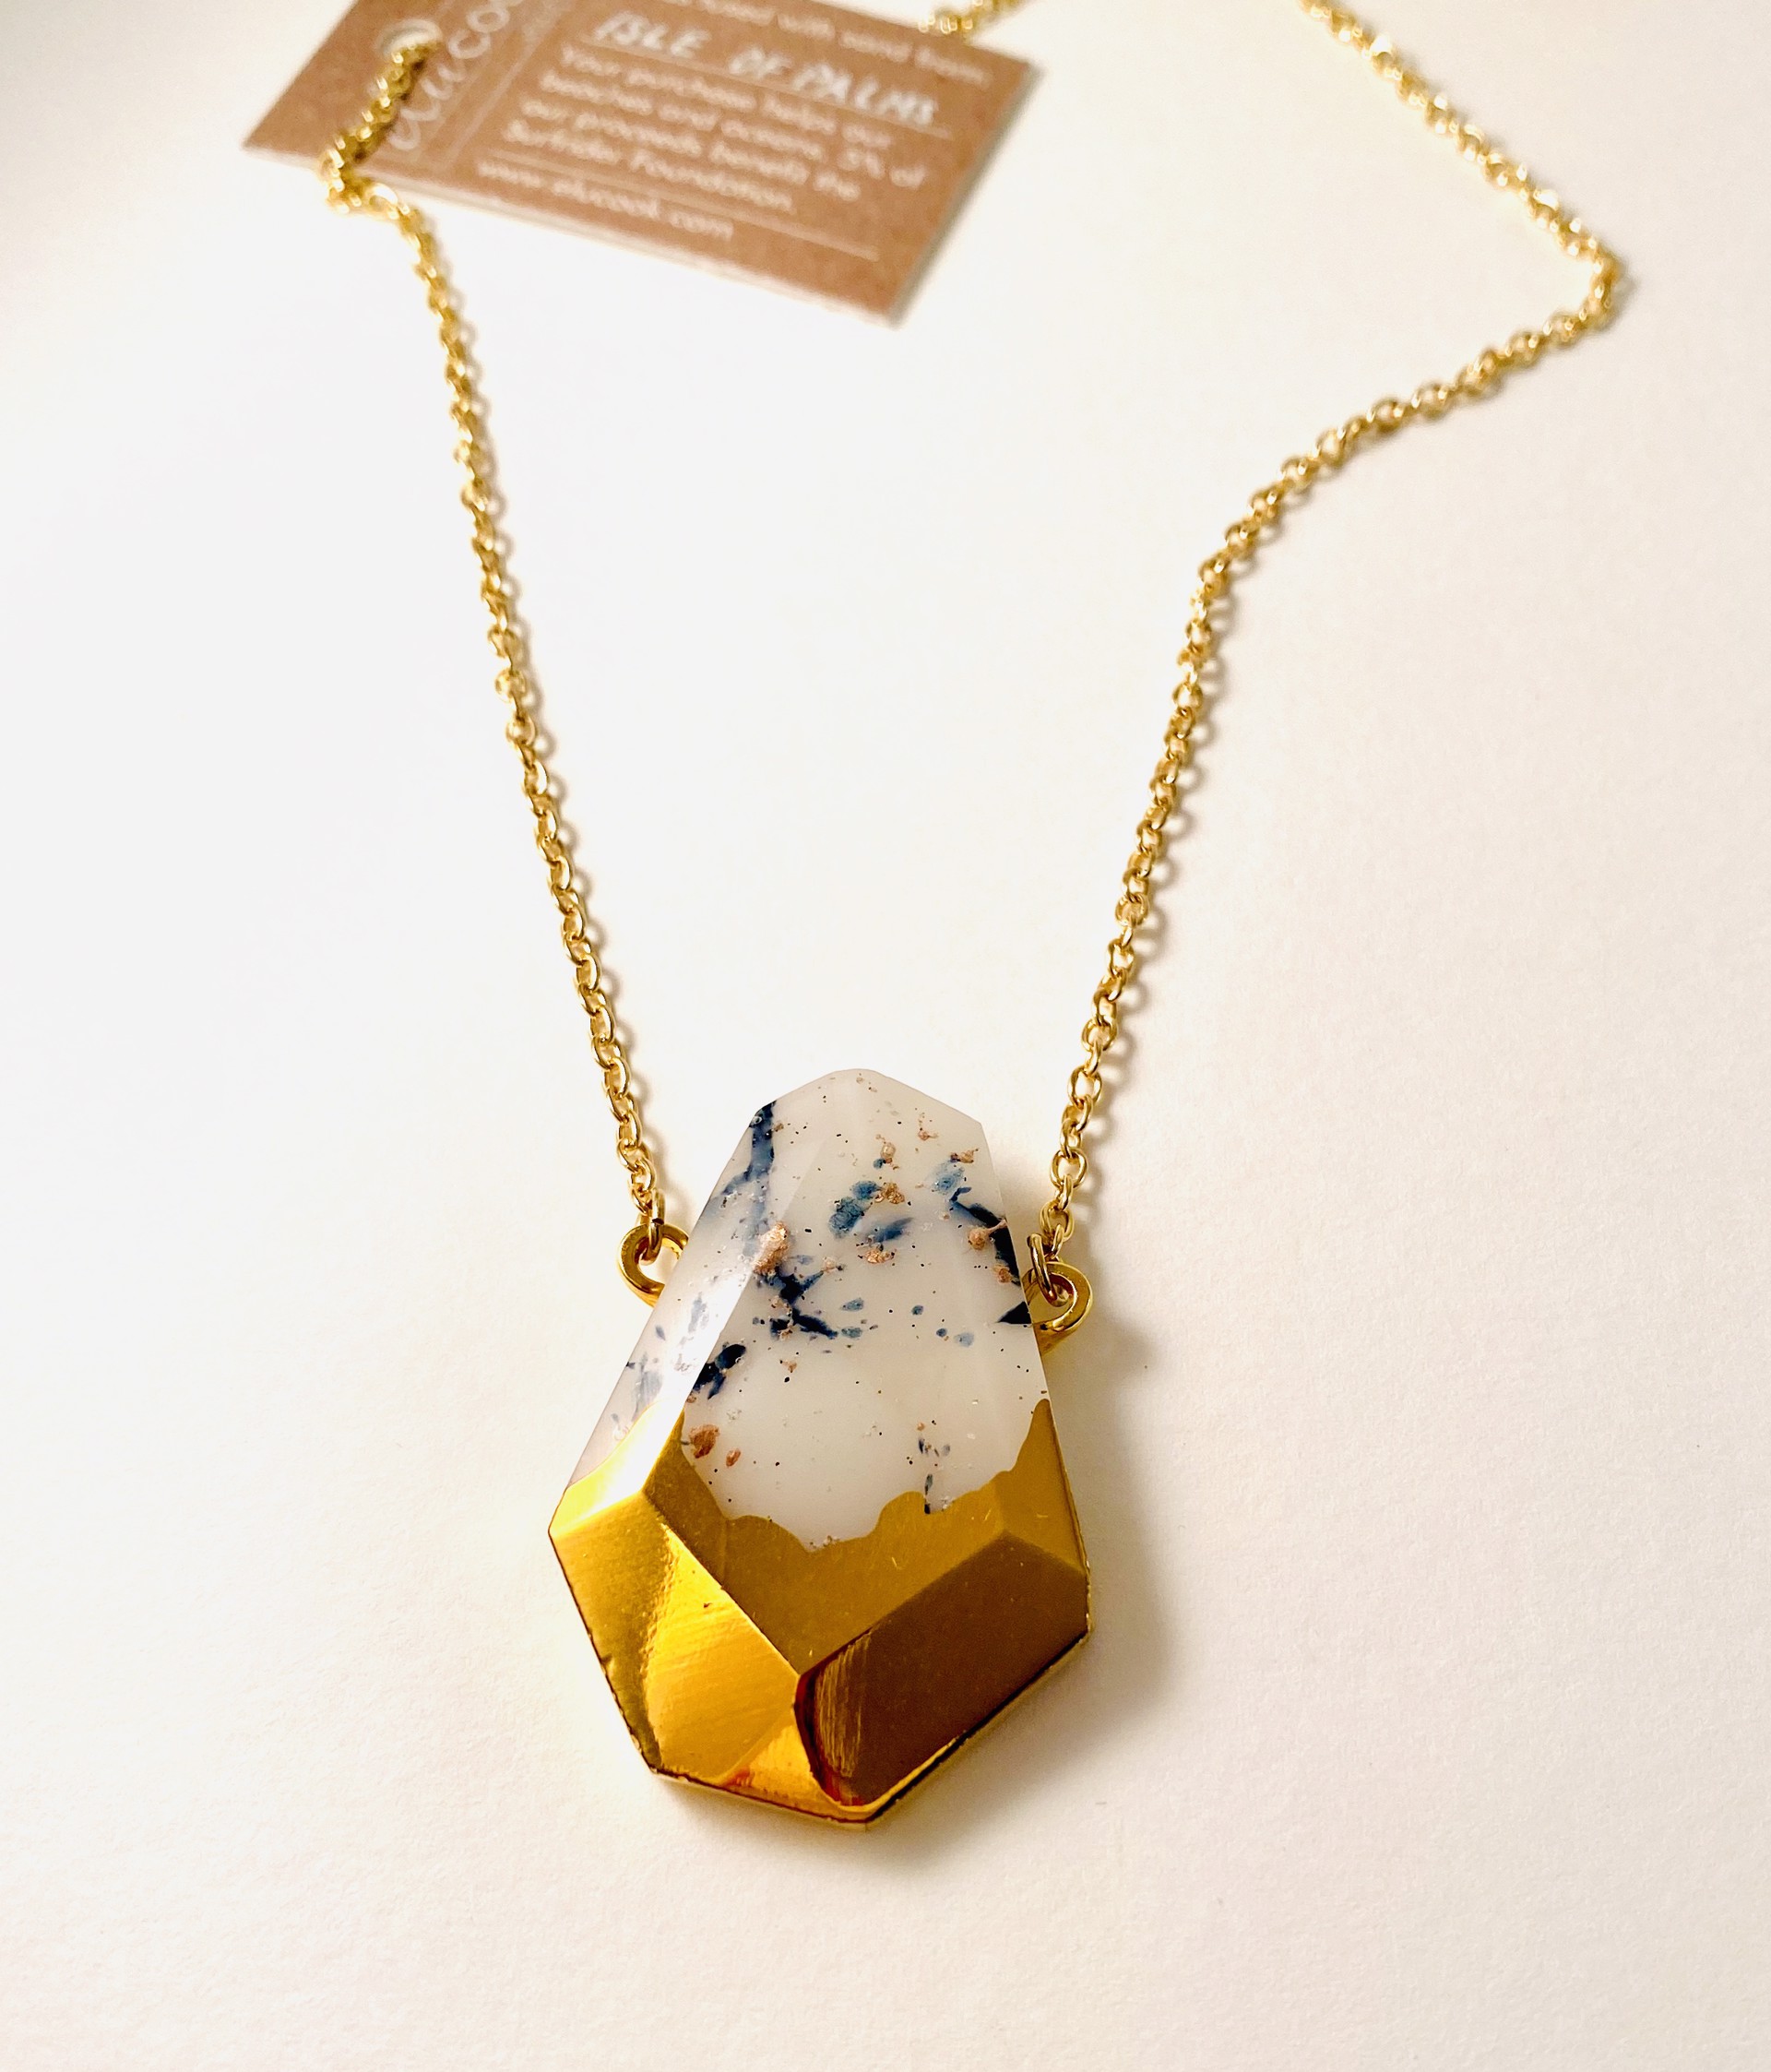 "Facets" Series Necklace, 24k luster glaze, 30" gp chain, 1I by Emily Cook